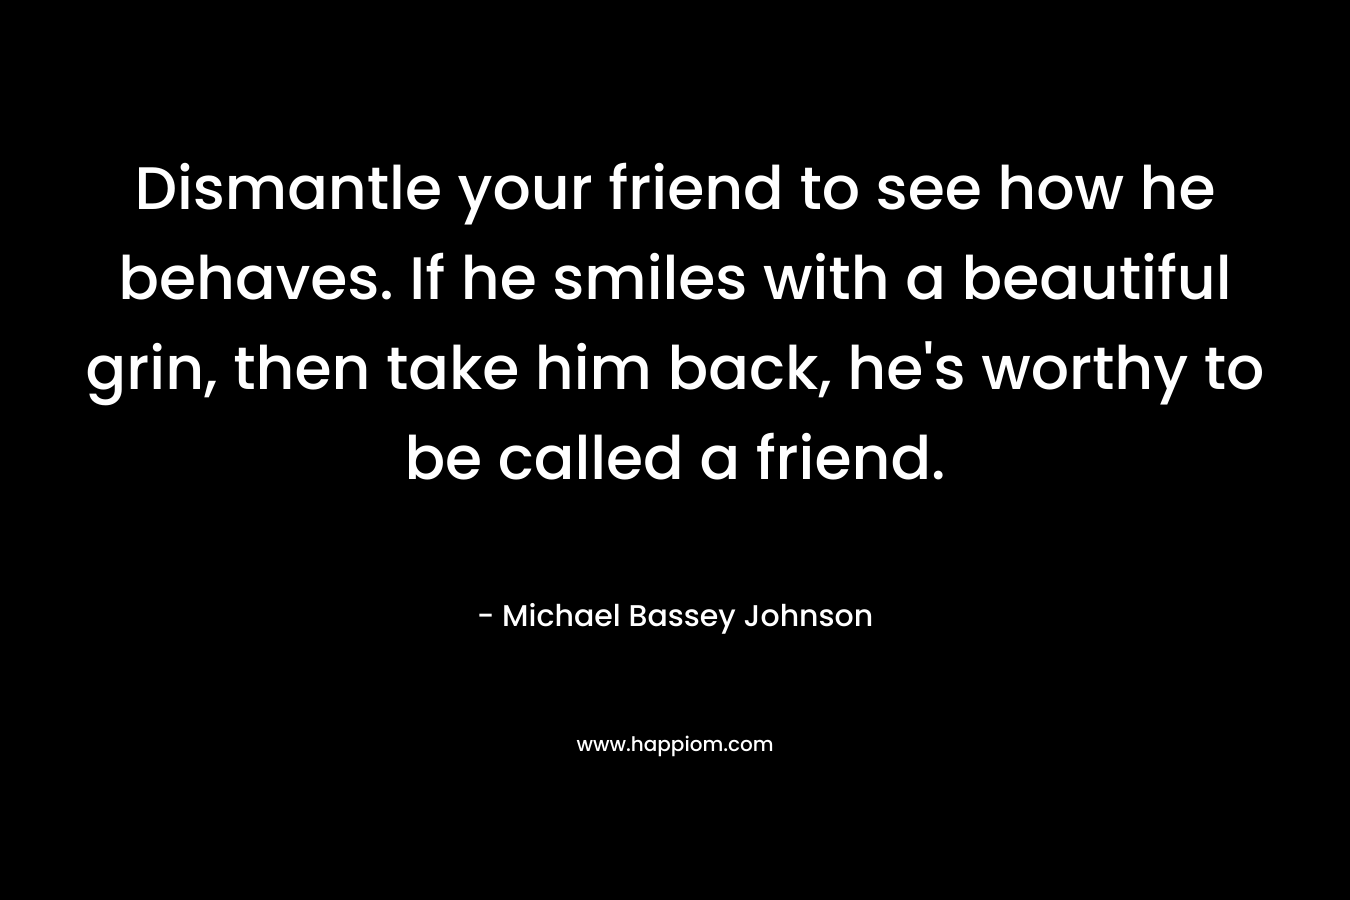 Dismantle your friend to see how he behaves. If he smiles with a beautiful grin, then take him back, he's worthy to be called a friend.